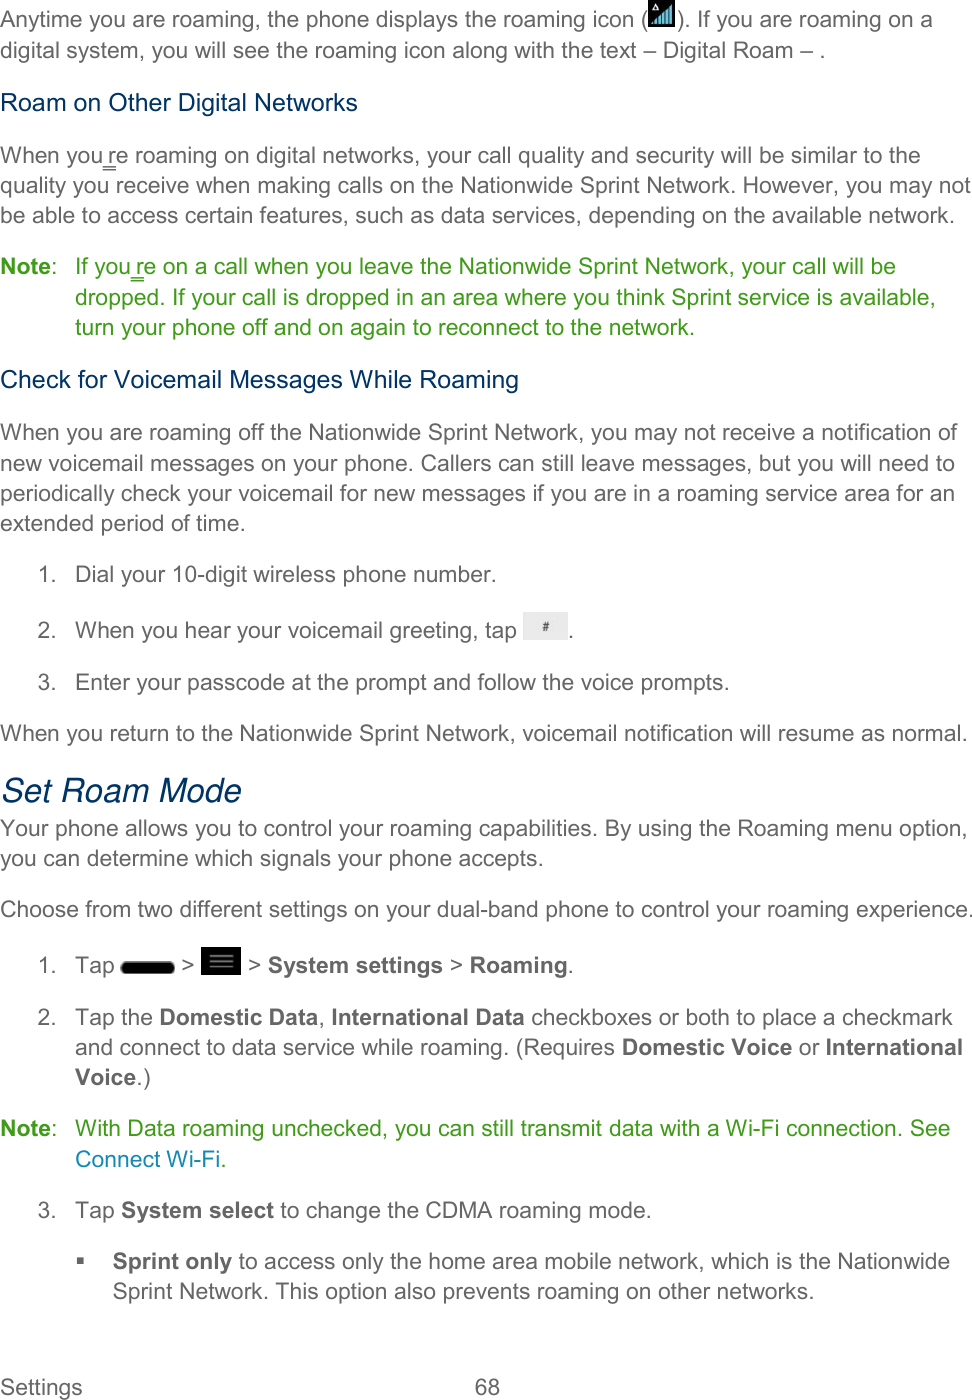  Settings  68   Anytime you are roaming, the phone displays the roaming icon ( ). If you are roaming on a digital system, you will see the roaming icon along with the text – Digital Roam – . Roam on Other Digital Networks When you‗re roaming on digital networks, your call quality and security will be similar to the quality you receive when making calls on the Nationwide Sprint Network. However, you may not be able to access certain features, such as data services, depending on the available network. Note:   If you‗re on a call when you leave the Nationwide Sprint Network, your call will be dropped. If your call is dropped in an area where you think Sprint service is available, turn your phone off and on again to reconnect to the network. Check for Voicemail Messages While Roaming When you are roaming off the Nationwide Sprint Network, you may not receive a notification of new voicemail messages on your phone. Callers can still leave messages, but you will need to periodically check your voicemail for new messages if you are in a roaming service area for an extended period of time. 1.  Dial your 10-digit wireless phone number. 2.  When you hear your voicemail greeting, tap  . 3.  Enter your passcode at the prompt and follow the voice prompts. When you return to the Nationwide Sprint Network, voicemail notification will resume as normal. Set Roam Mode Your phone allows you to control your roaming capabilities. By using the Roaming menu option, you can determine which signals your phone accepts. Choose from two different settings on your dual-band phone to control your roaming experience. 1.  Tap   &gt;   &gt; System settings &gt; Roaming. 2.  Tap the Domestic Data, International Data checkboxes or both to place a checkmark and connect to data service while roaming. (Requires Domestic Voice or International Voice.) Note:   With Data roaming unchecked, you can still transmit data with a Wi-Fi connection. See Connect Wi-Fi. 3.  Tap System select to change the CDMA roaming mode.  Sprint only to access only the home area mobile network, which is the Nationwide Sprint Network. This option also prevents roaming on other networks. 